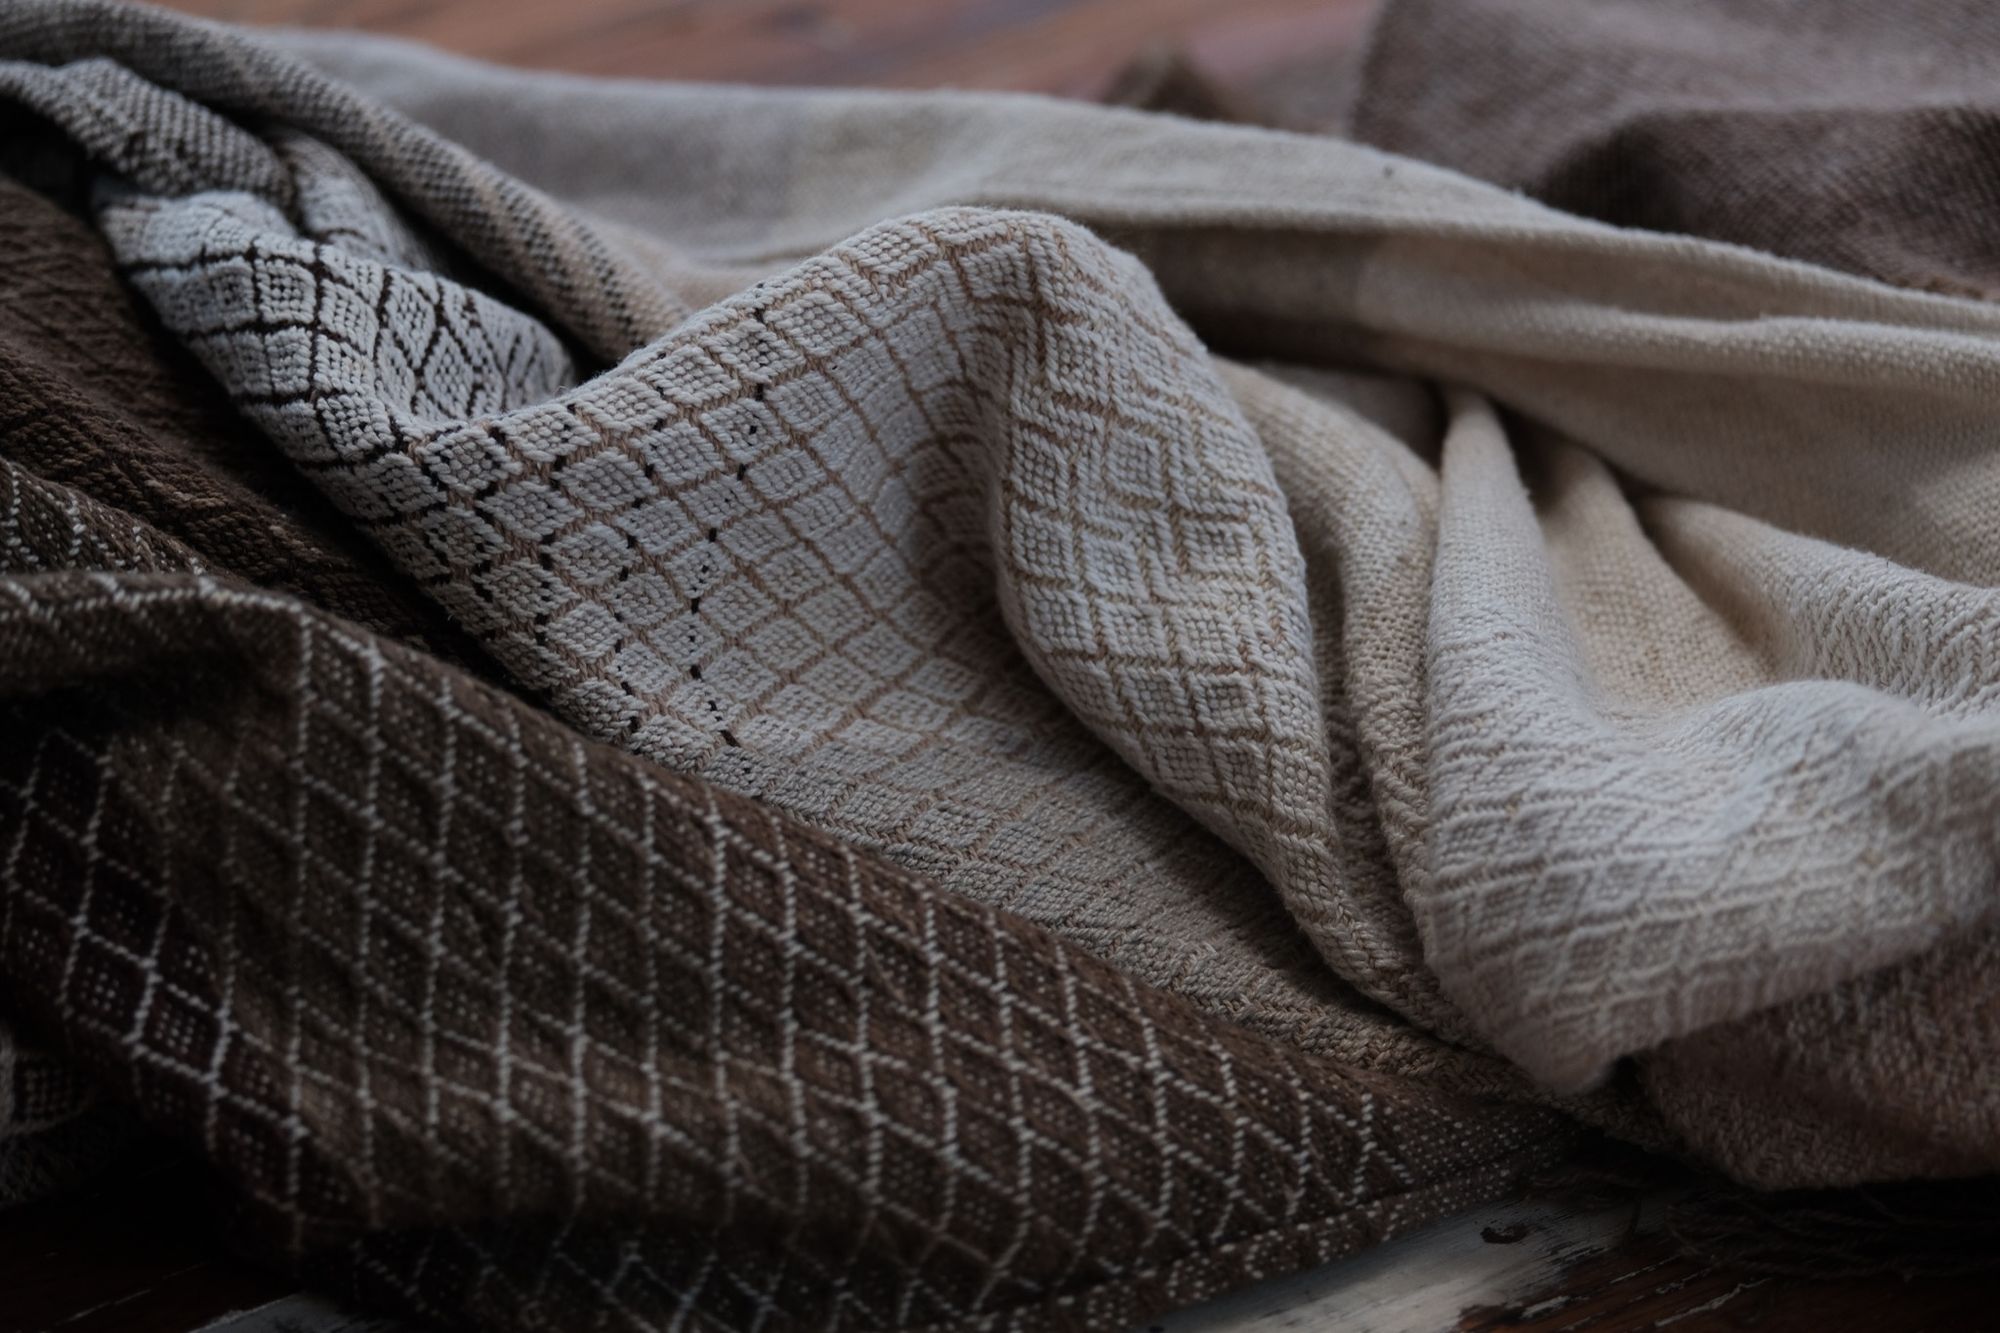 A detail of handwoven softly graded grey to white to brown diamond pattern raw silk fabric